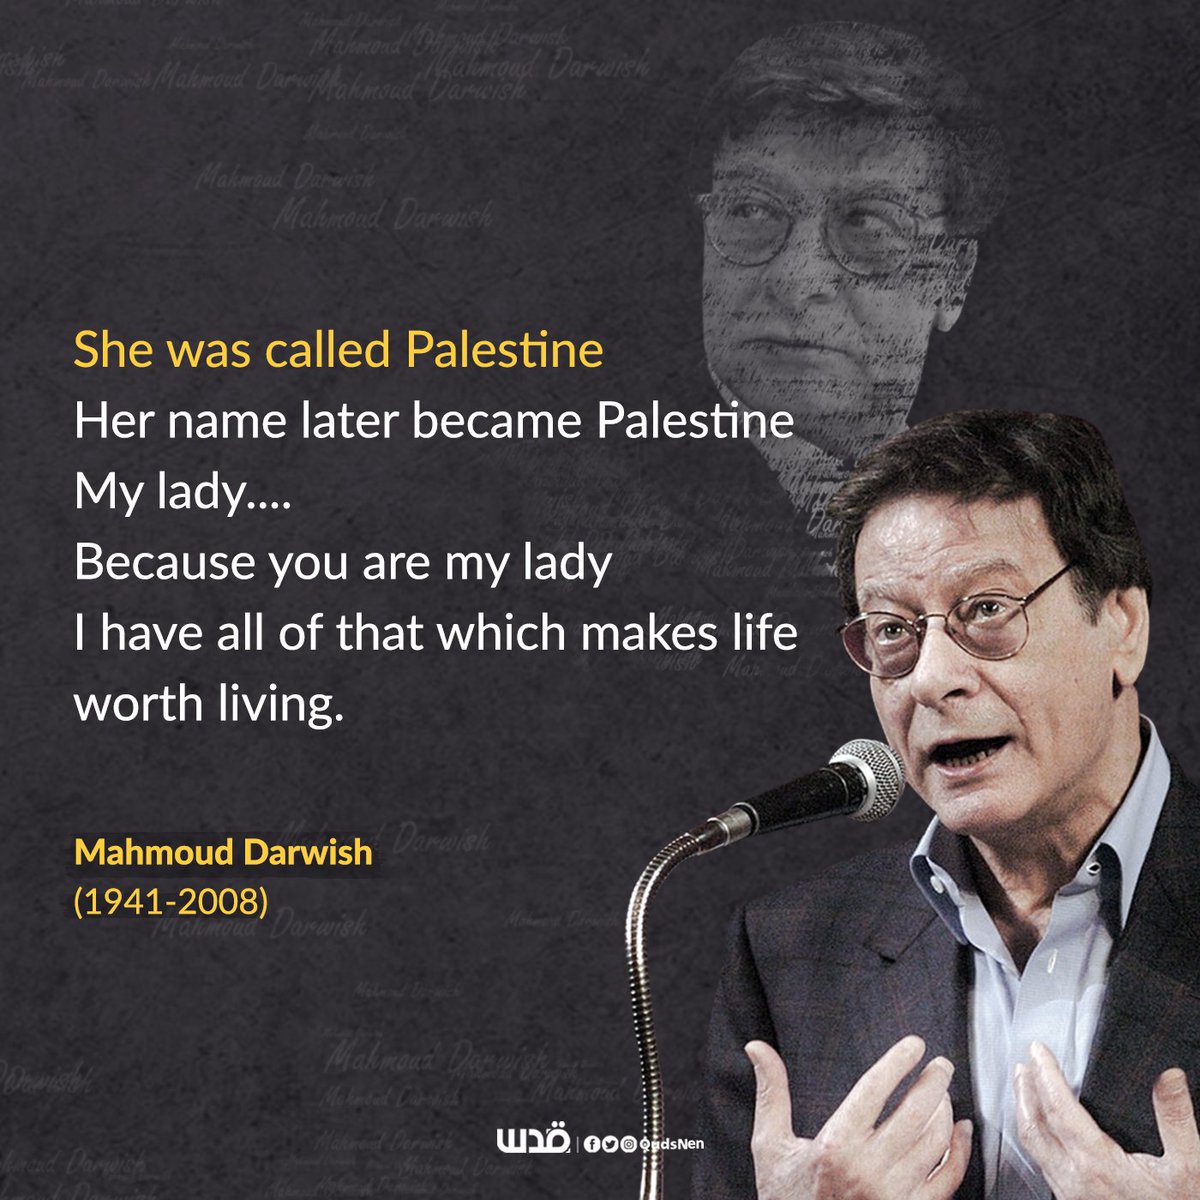 Quds News Network on Twitter: "Today, August 9, marks the anniversary of the death of the Palestinian renowned poet Mahmoud Darwish. Through poetry, Darwish portrayed the Palestinian life in different aspects, including